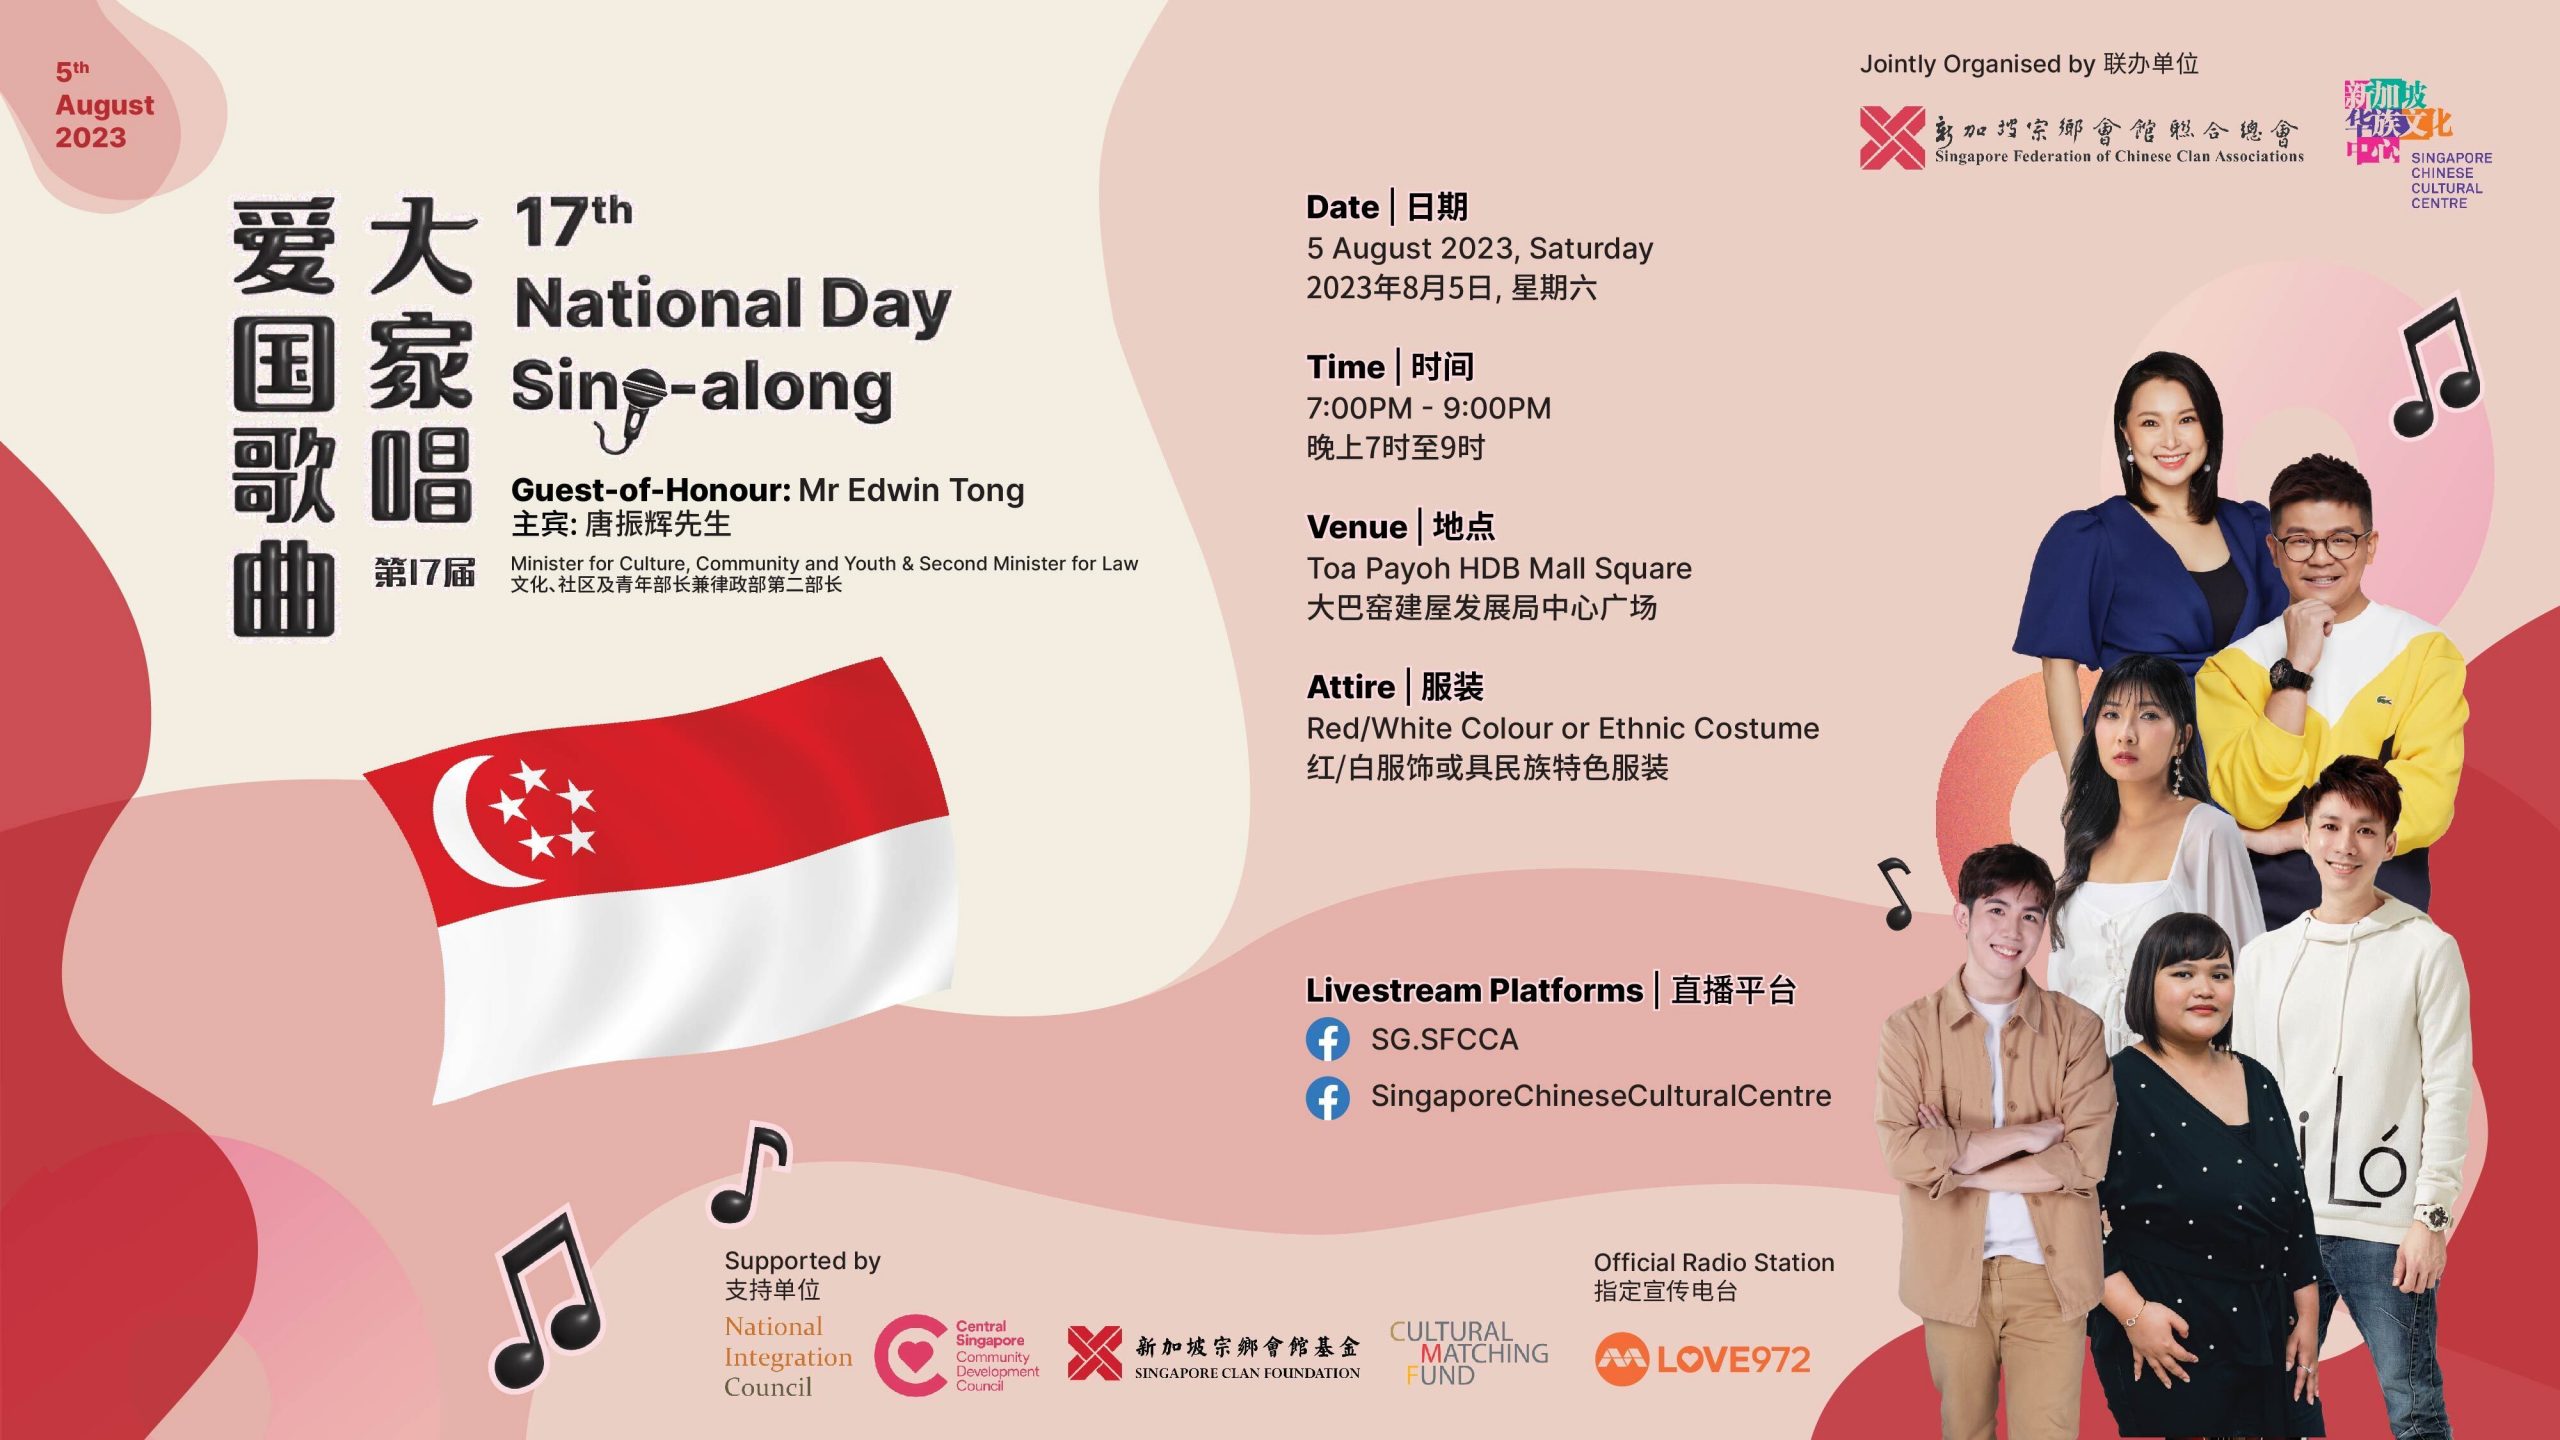 Visuals with event details of the 17th National Day Sing-Along